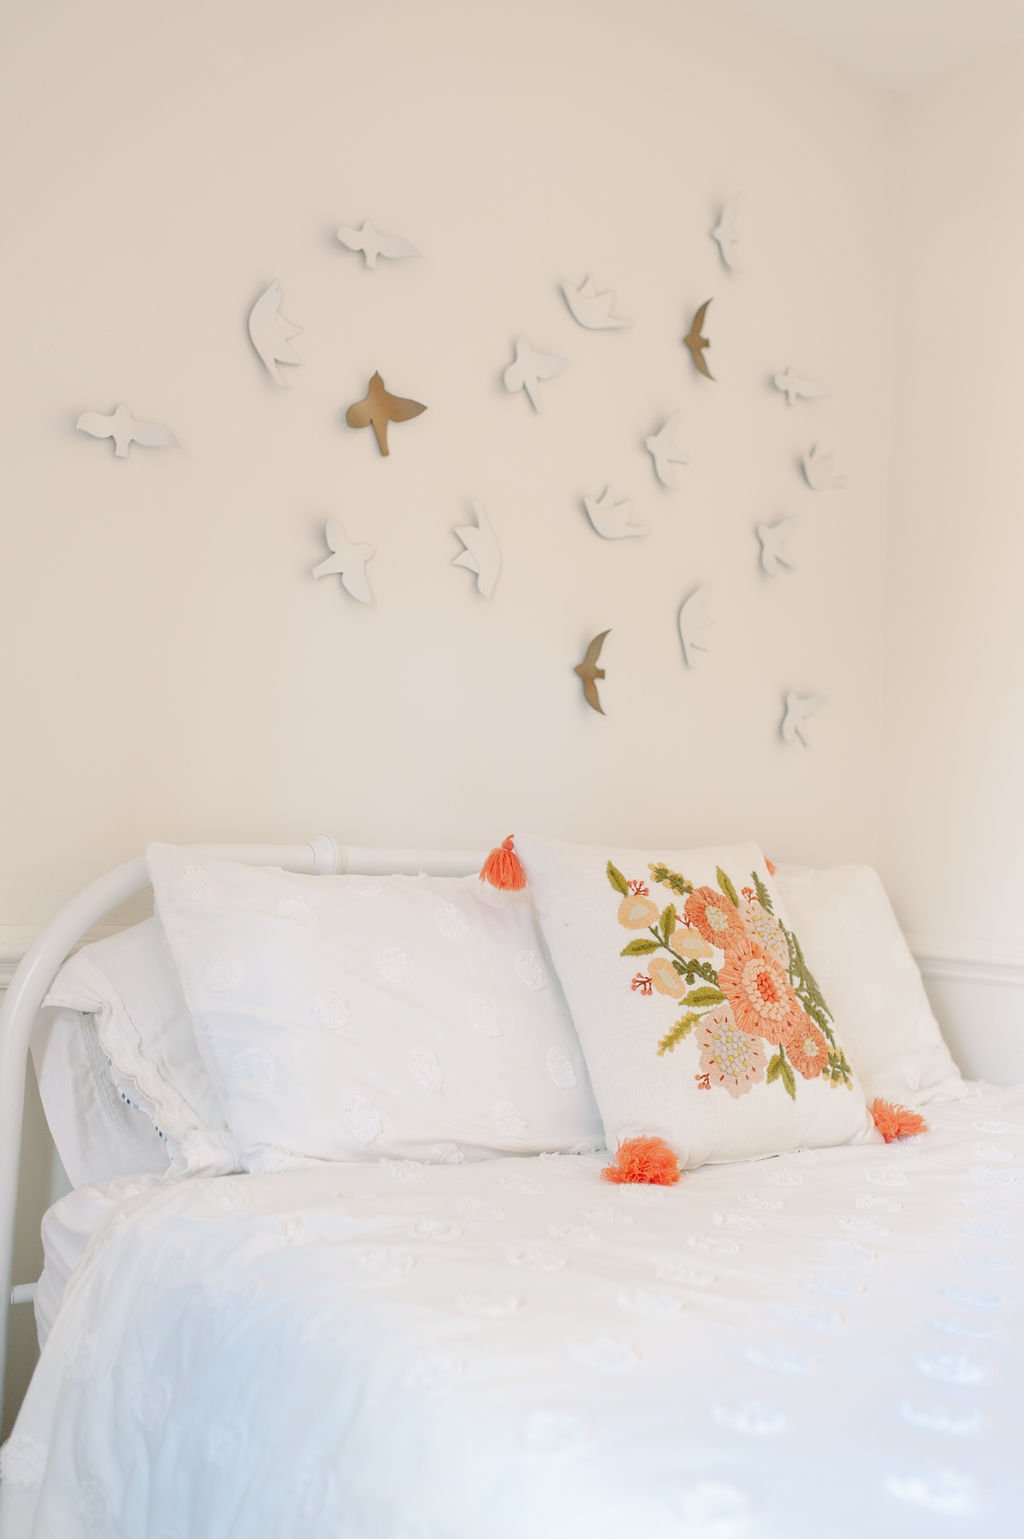 Little Girl's Room showing bed with white metal headboard, white comforter, floral pillow, and bird art